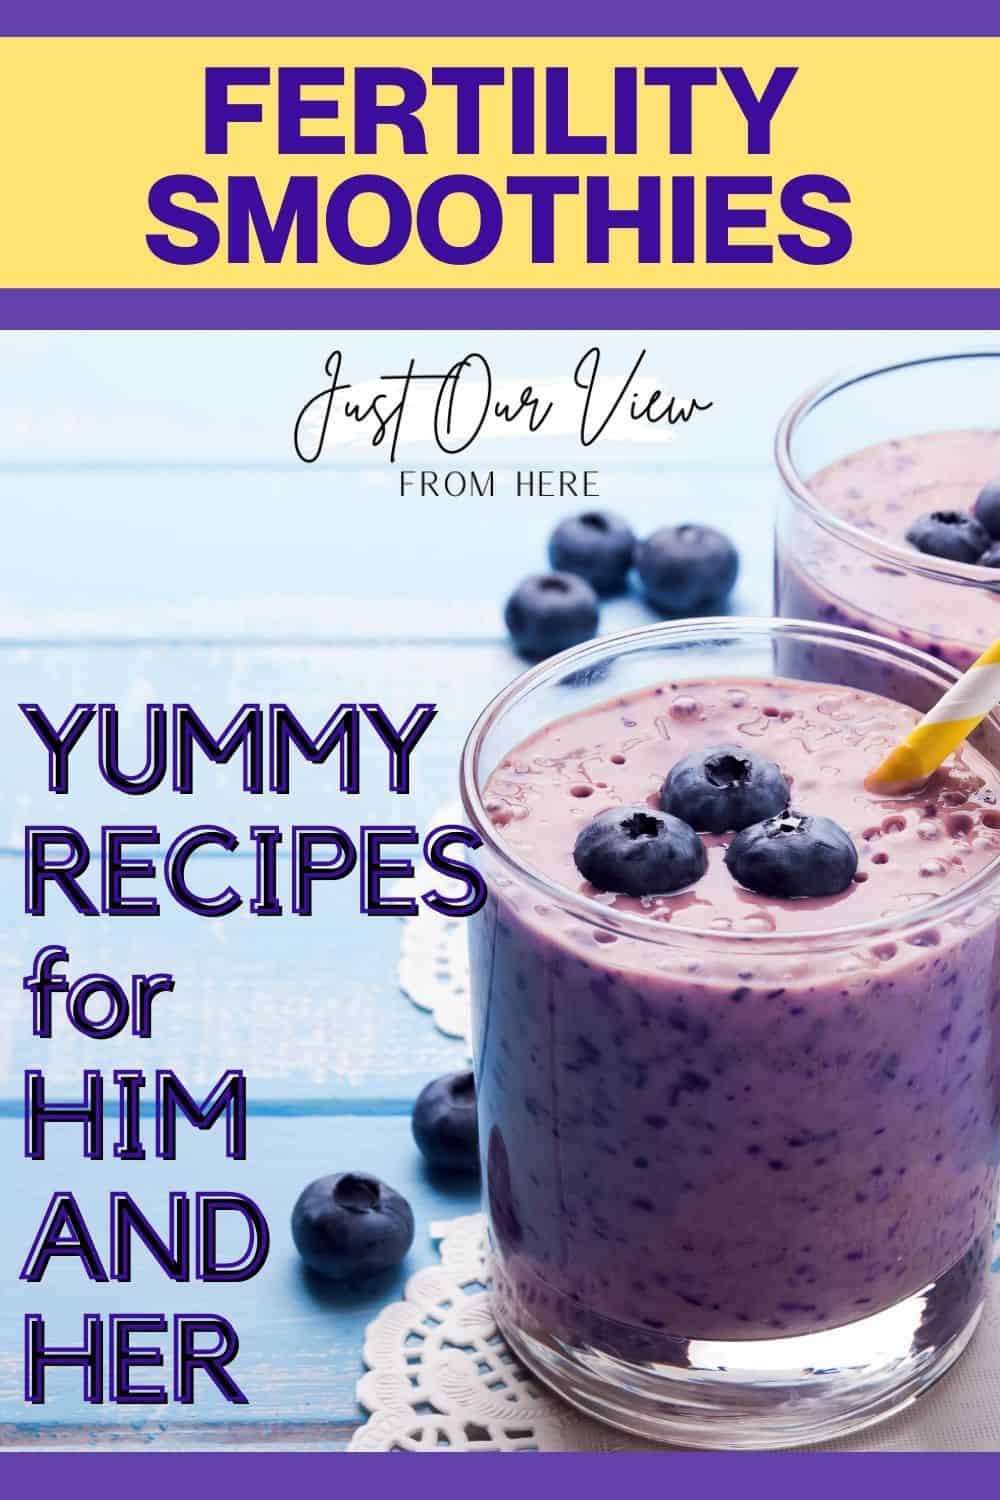 fertility smoothies yummy recipes for him and her